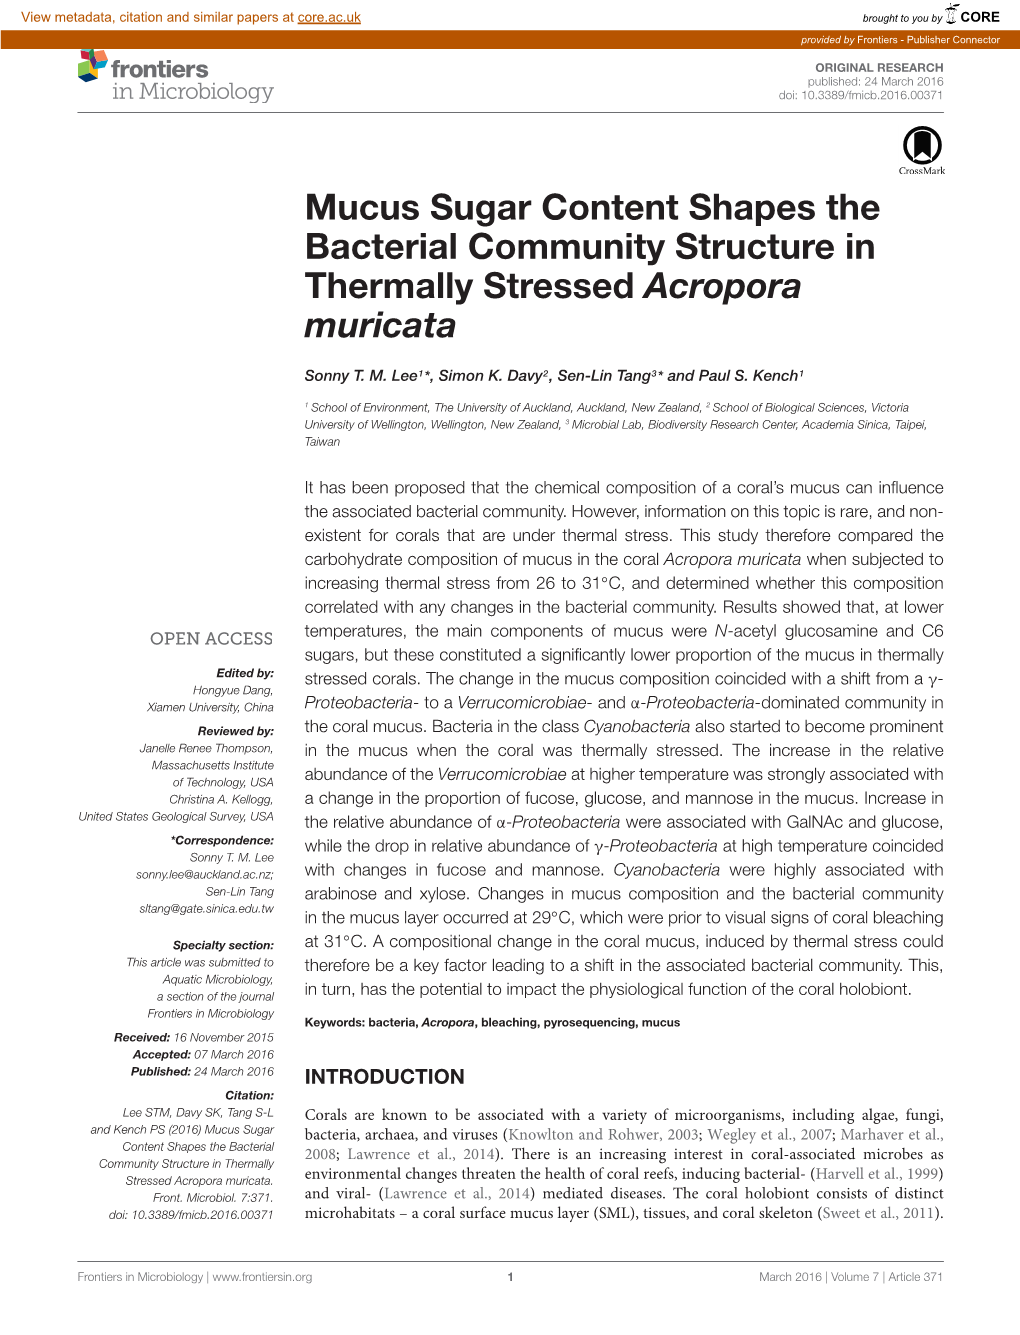 Mucus Sugar Content Shapes the Bacterial Community Structure in Thermally Stressed Acropora Muricata